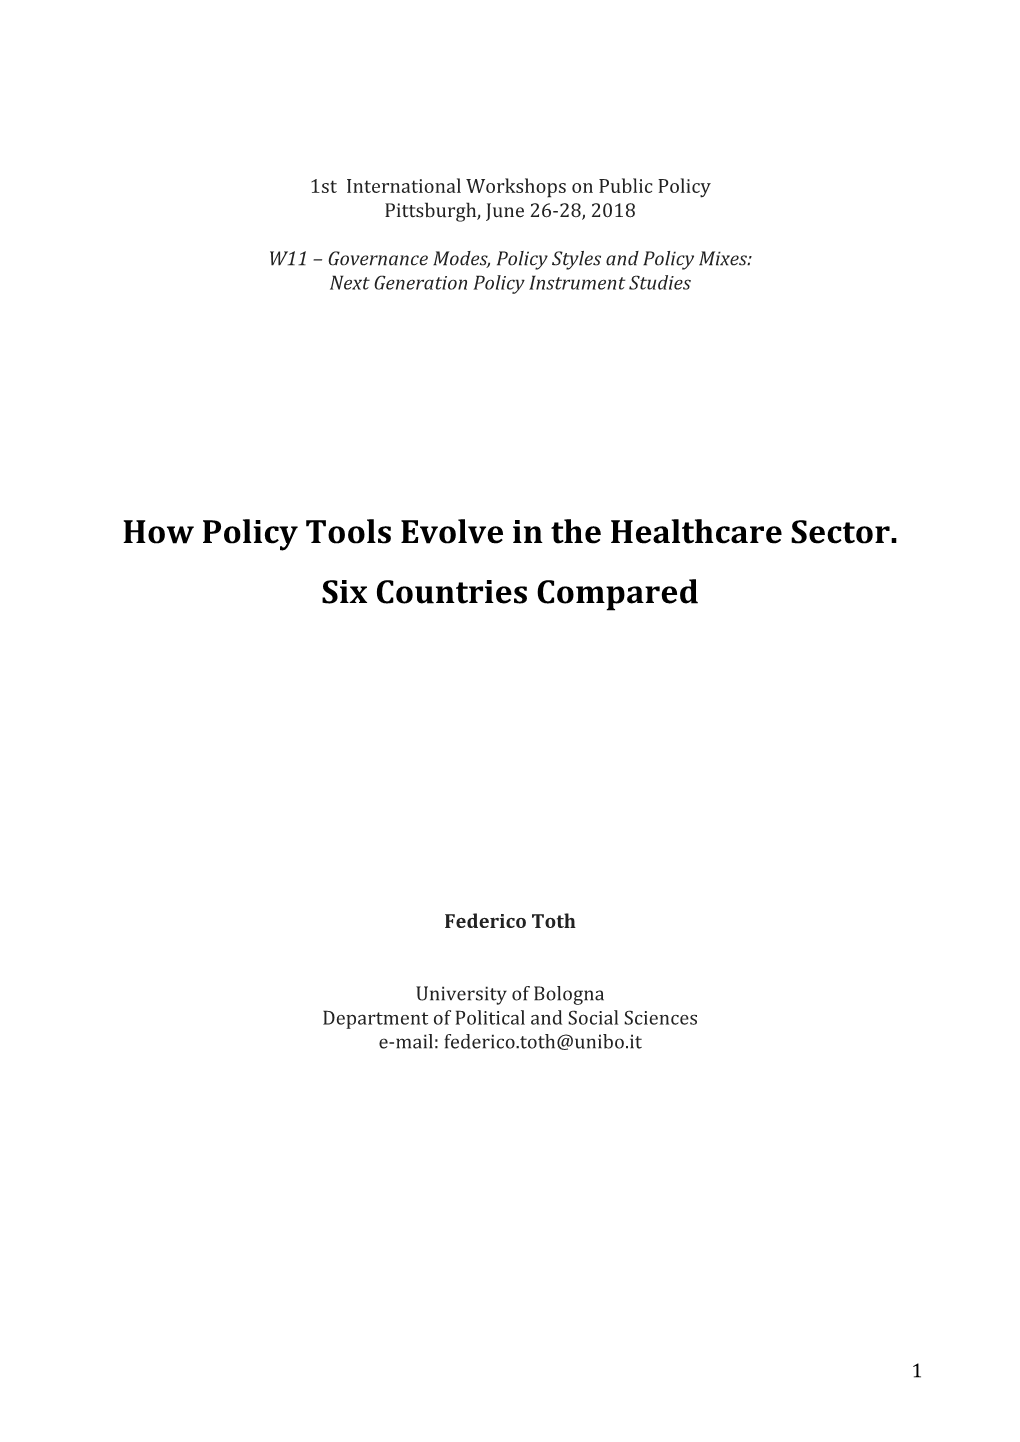 How Policy Tools Evolve in the Healthcare Sector. Six Countries Compared